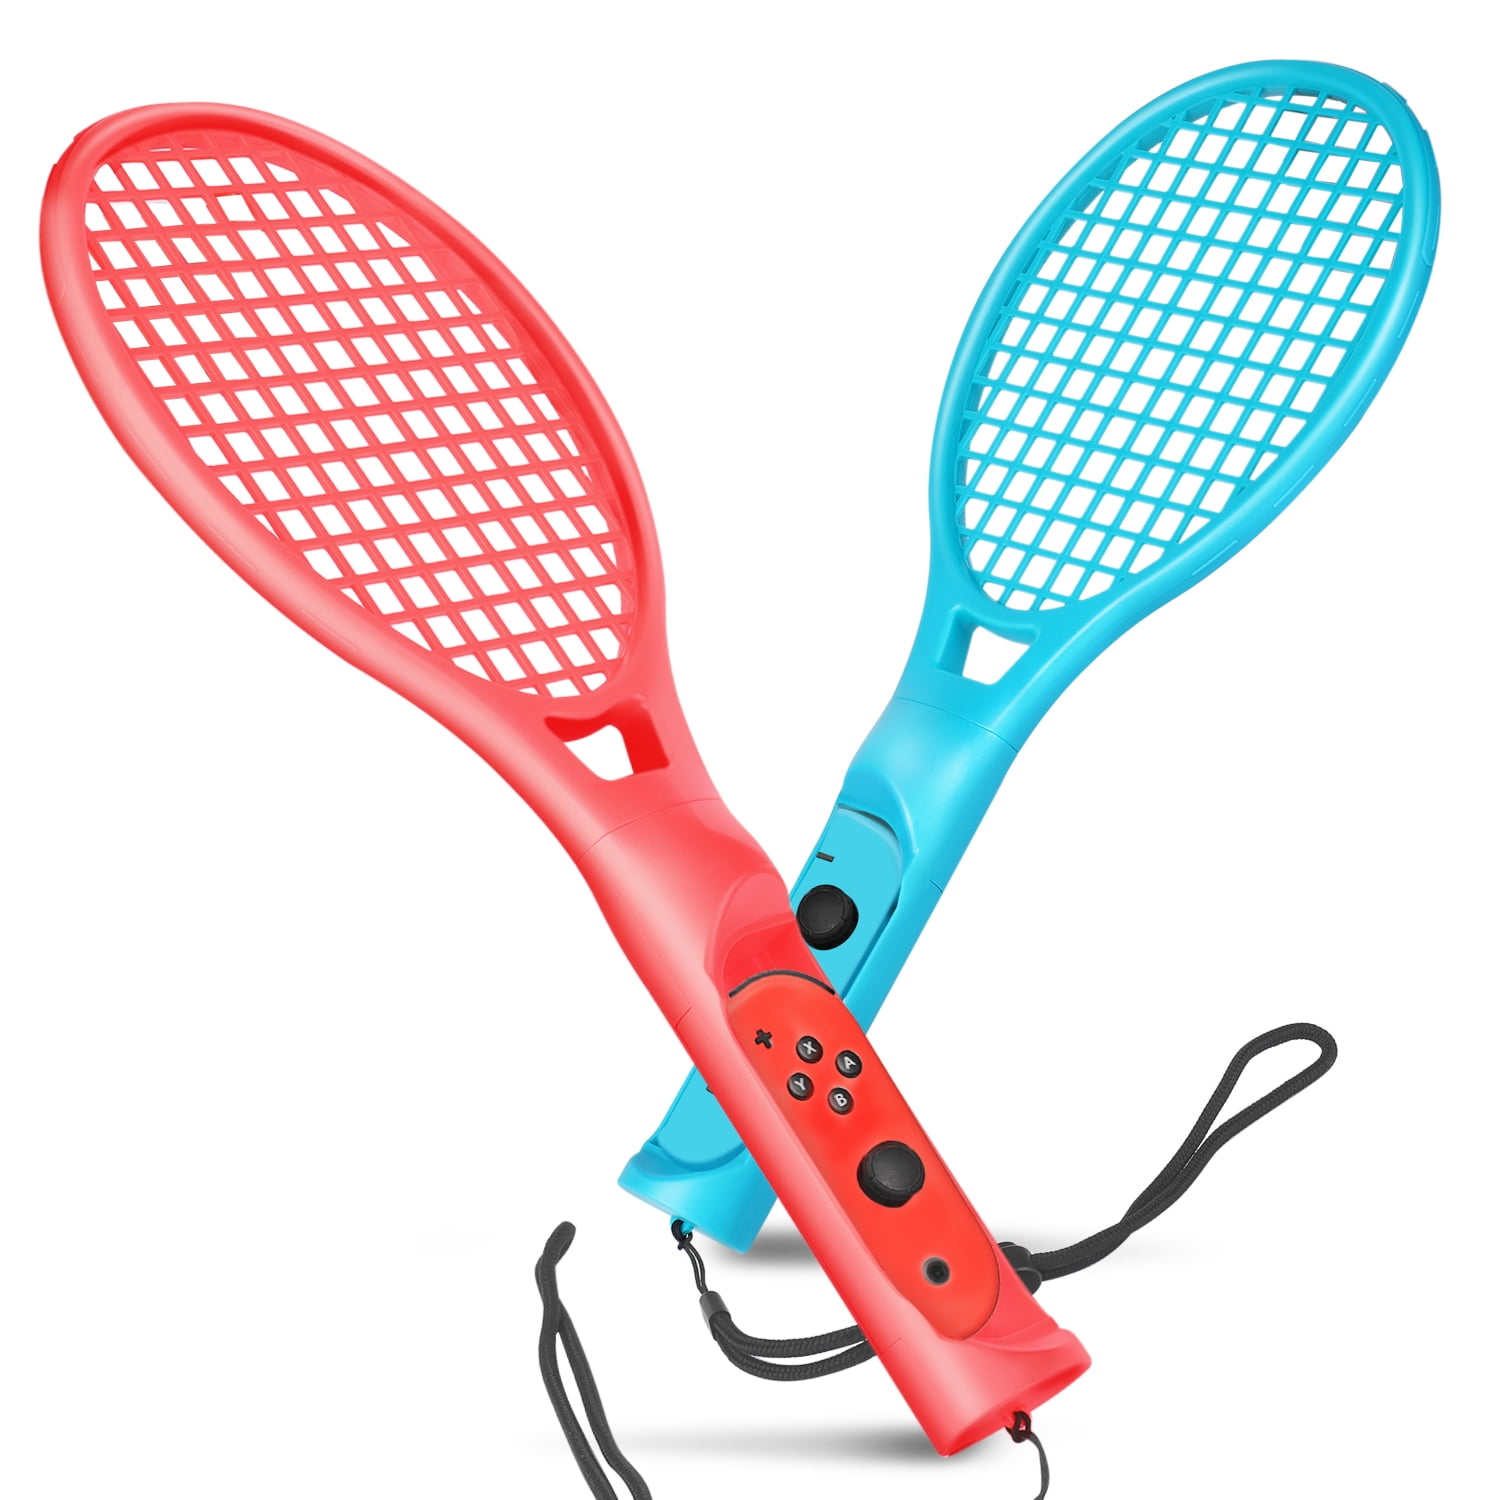 Interactie Grappig Uitgang Tennis Racket for Nintendo Switch Joy-Con Controller with Wrist Strap,  Joy-Con Racket Accessories Twin Pack for Nintendo Switch Game Mario Tennis  Aces Blue and Red - Walmart.com